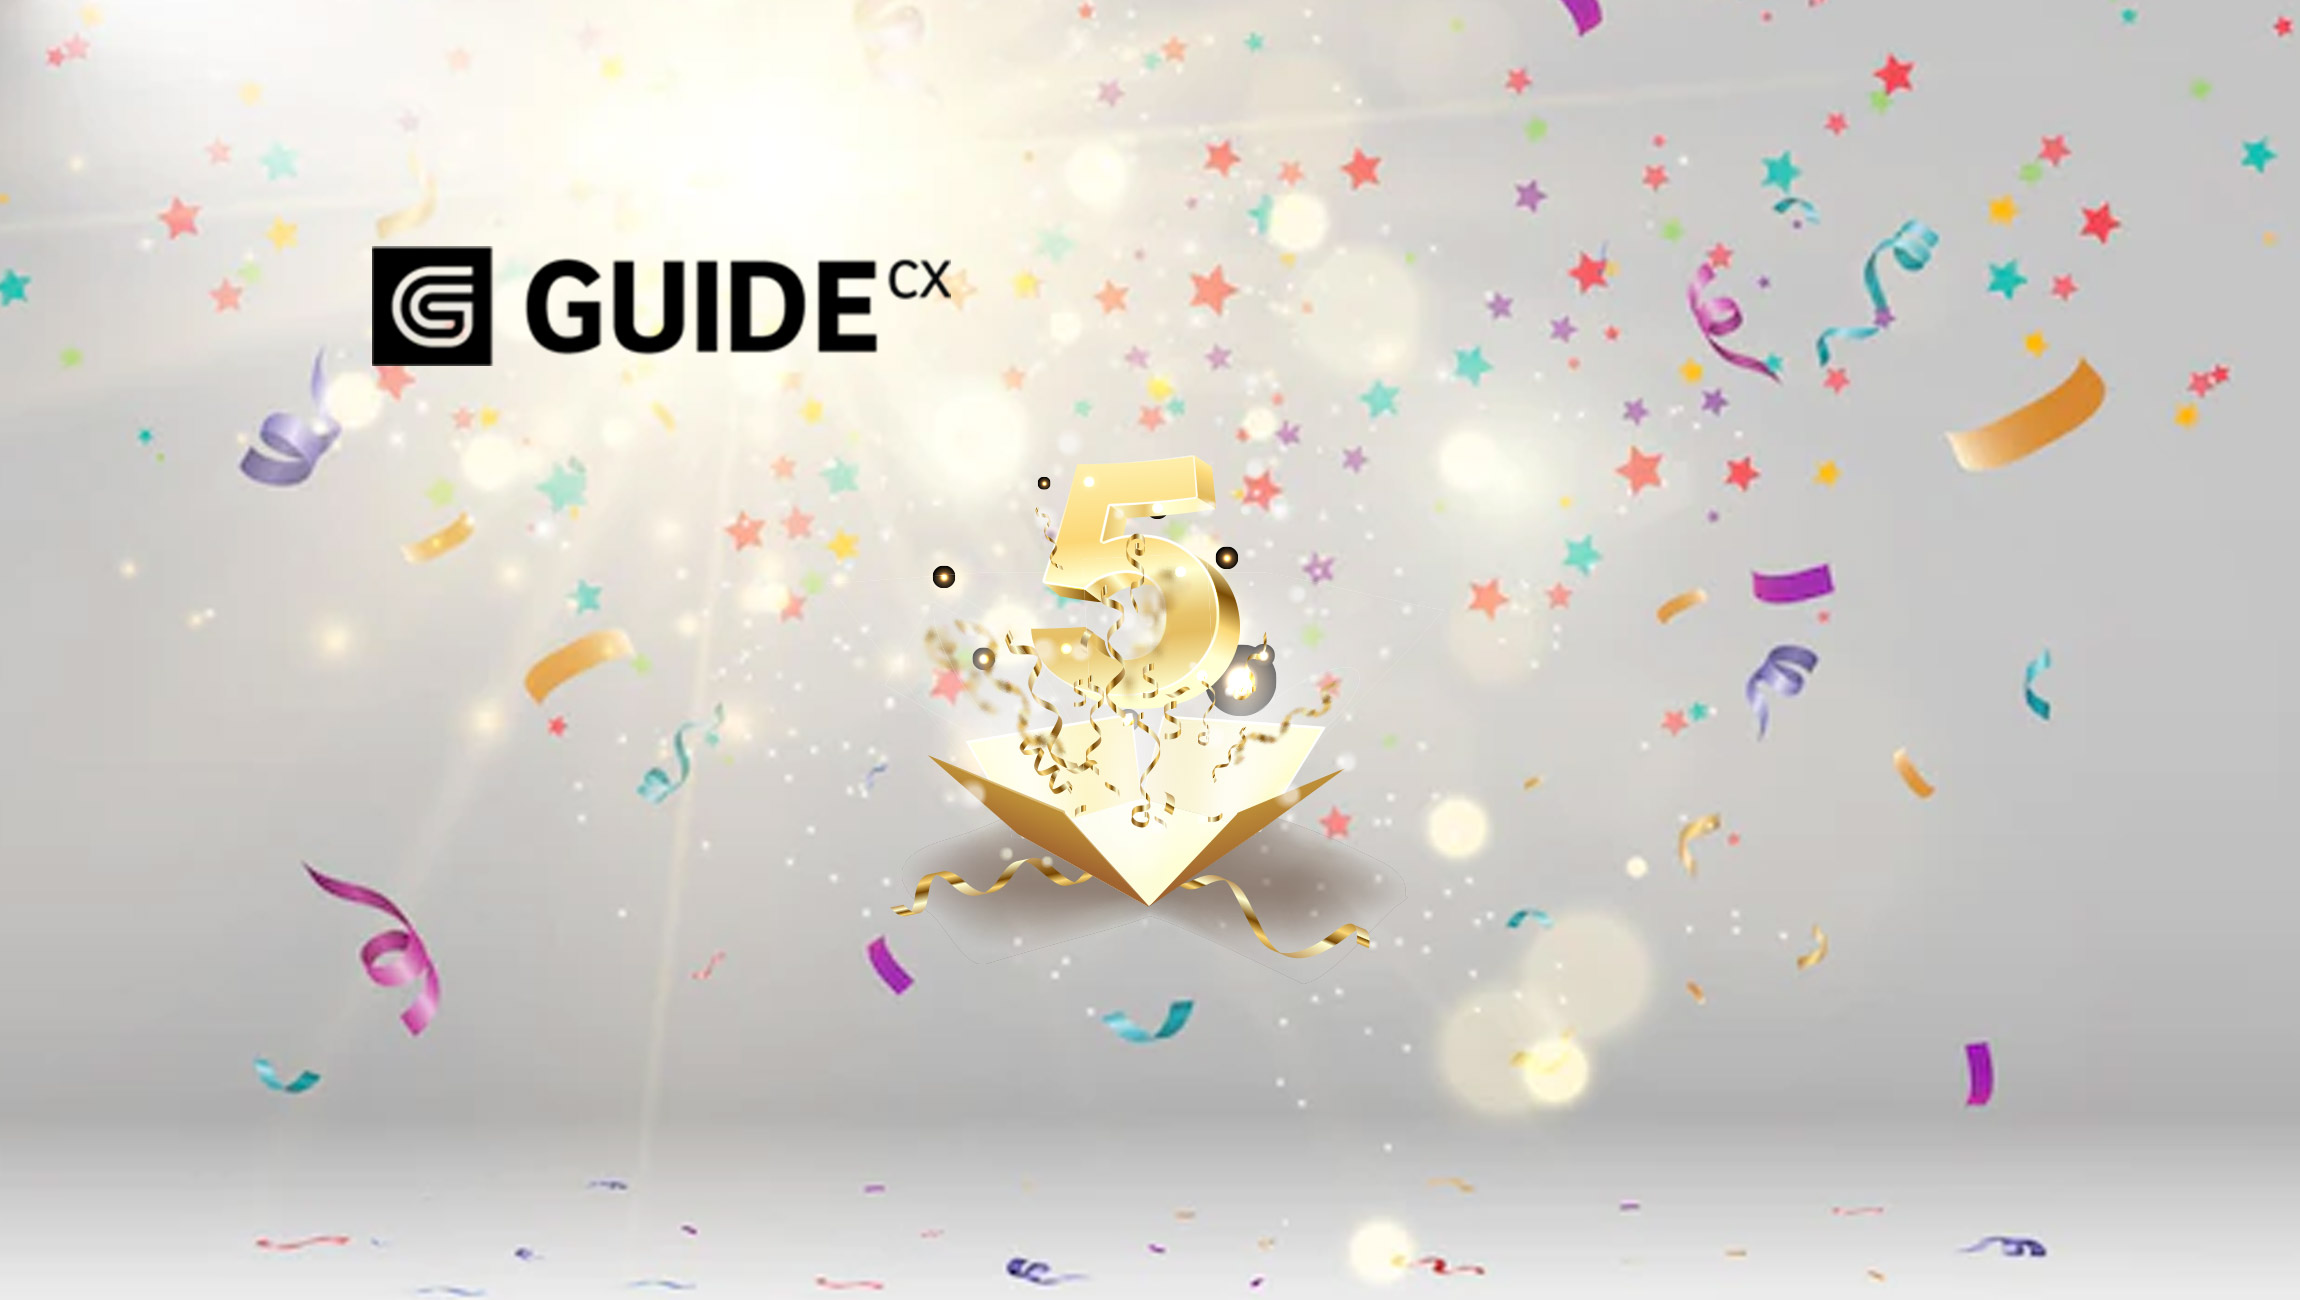 GUIDEcx, the Leader in Customer Onboarding, Celebrates Its Five-Year Anniversary